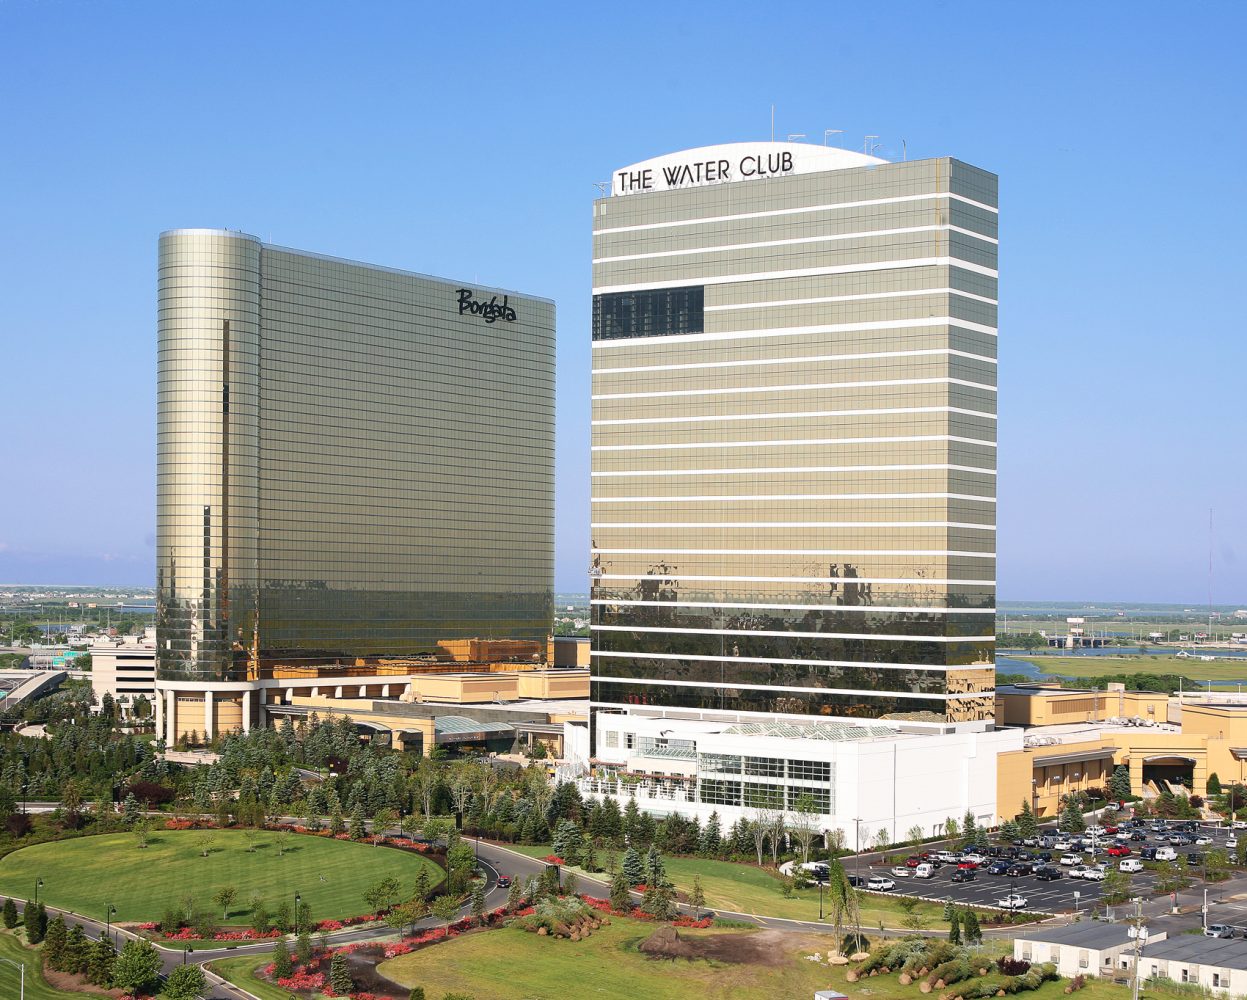 Largest Casino In The World